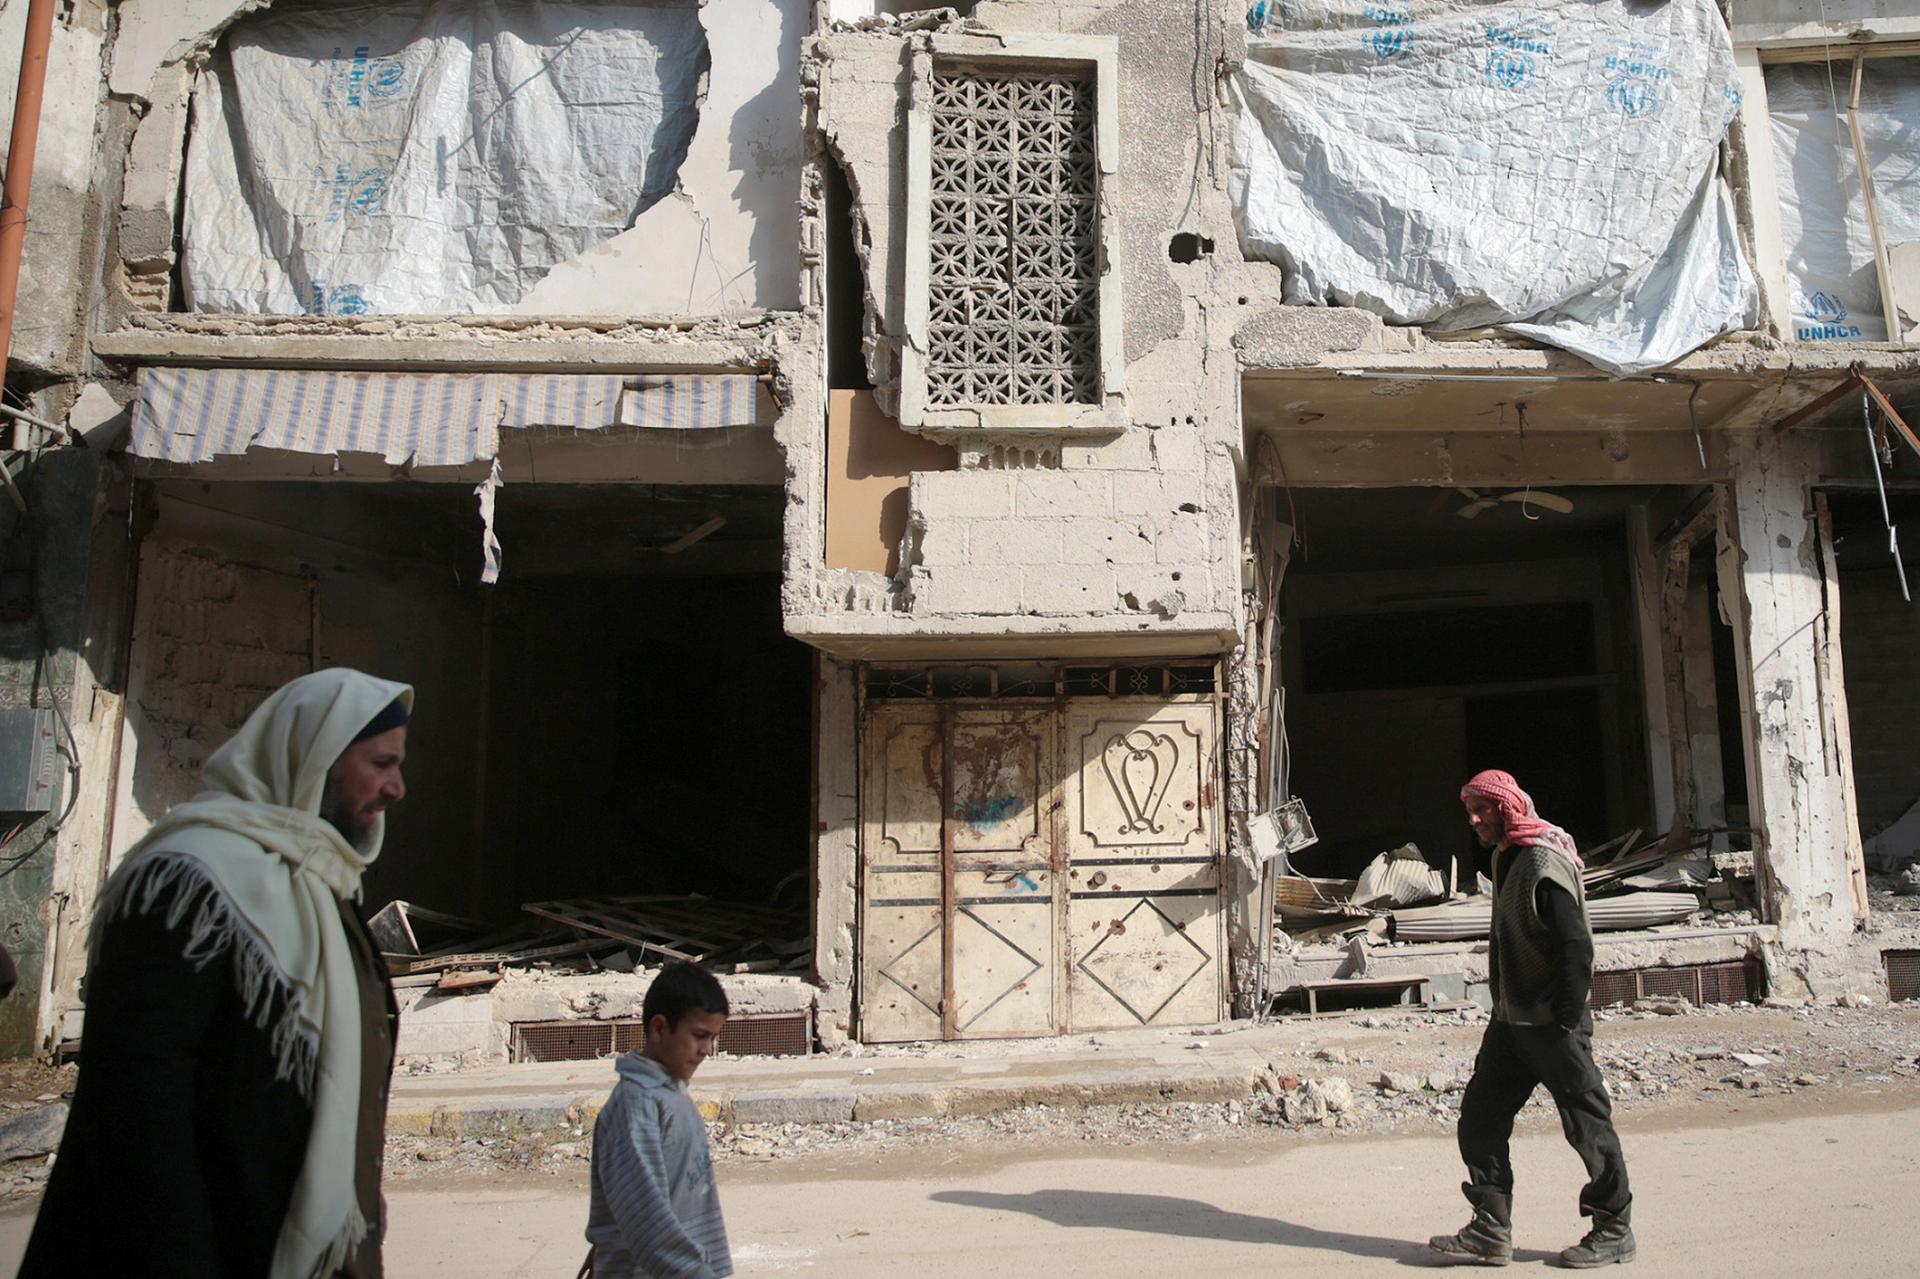 People walk past a damaged building in the eastern Damascus suburb of Ghouta, Syria.